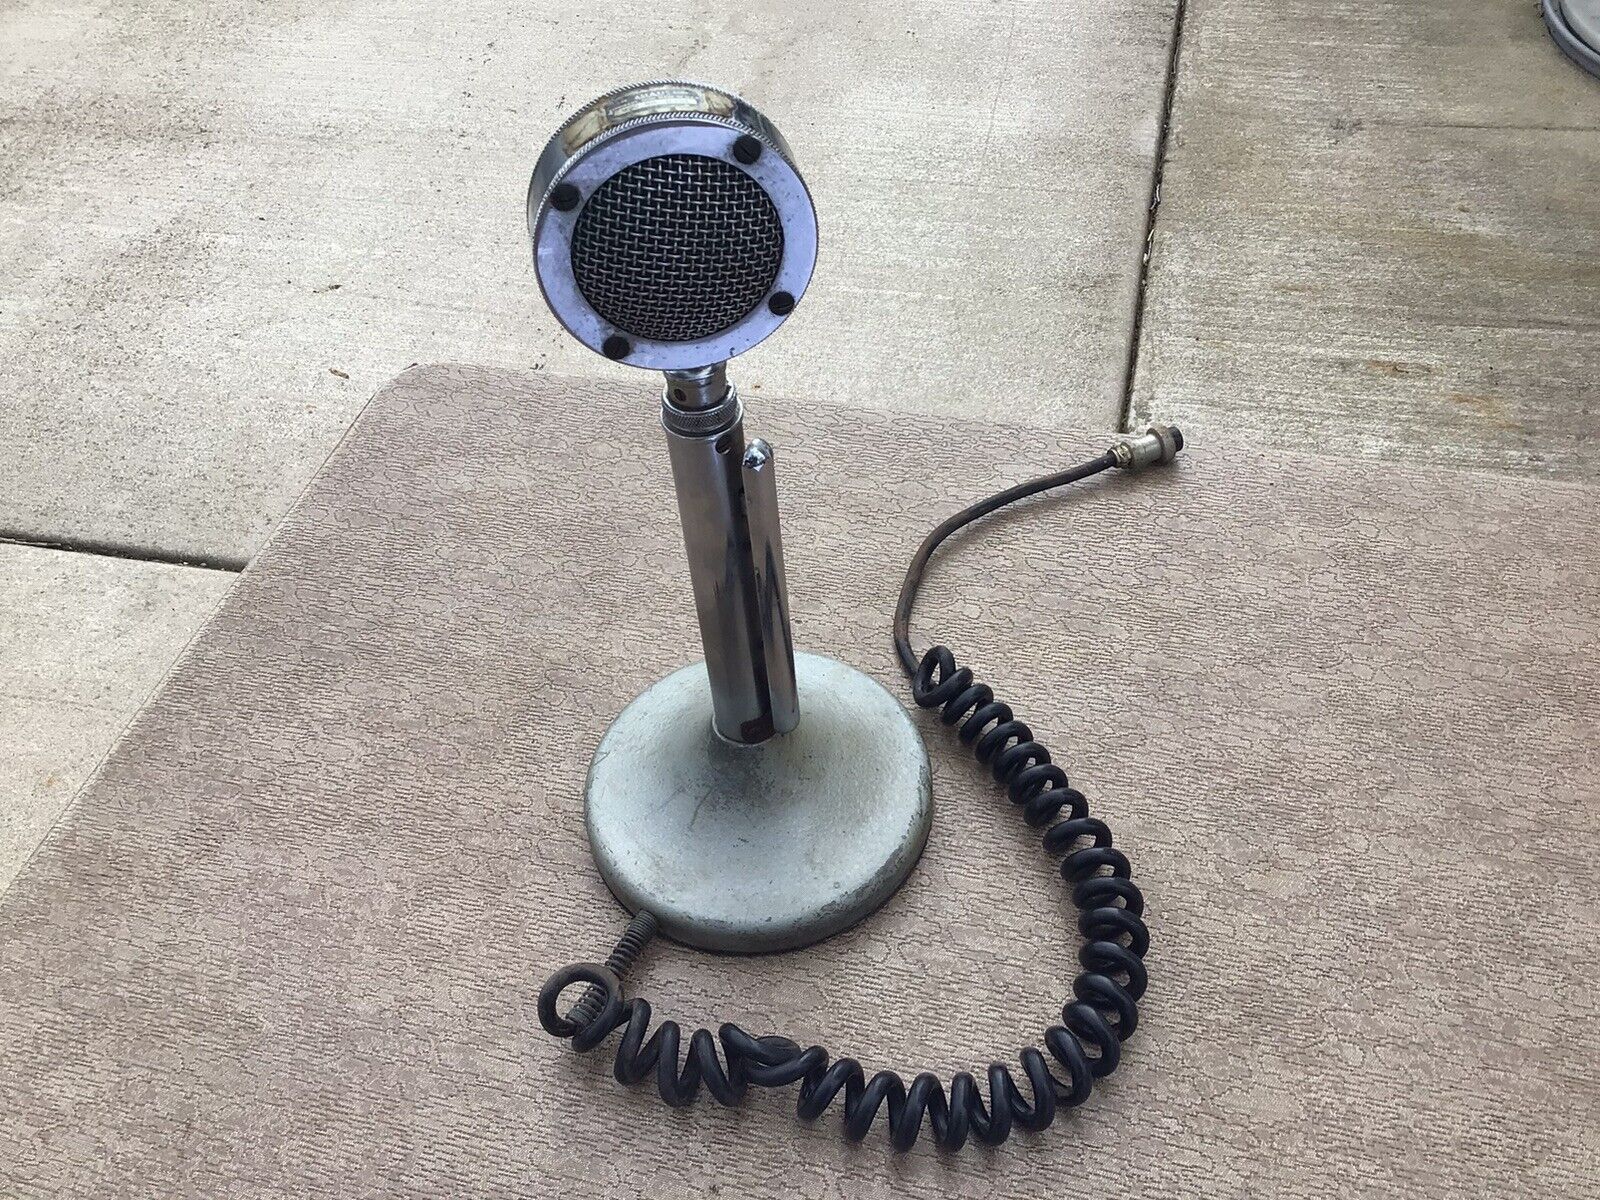 ASTATIC D104 LOLLIPOP MICROPHONE WITH TUG8 BASE UNTESTED 4 PIN CONNECTOR. Available Now for $40.00